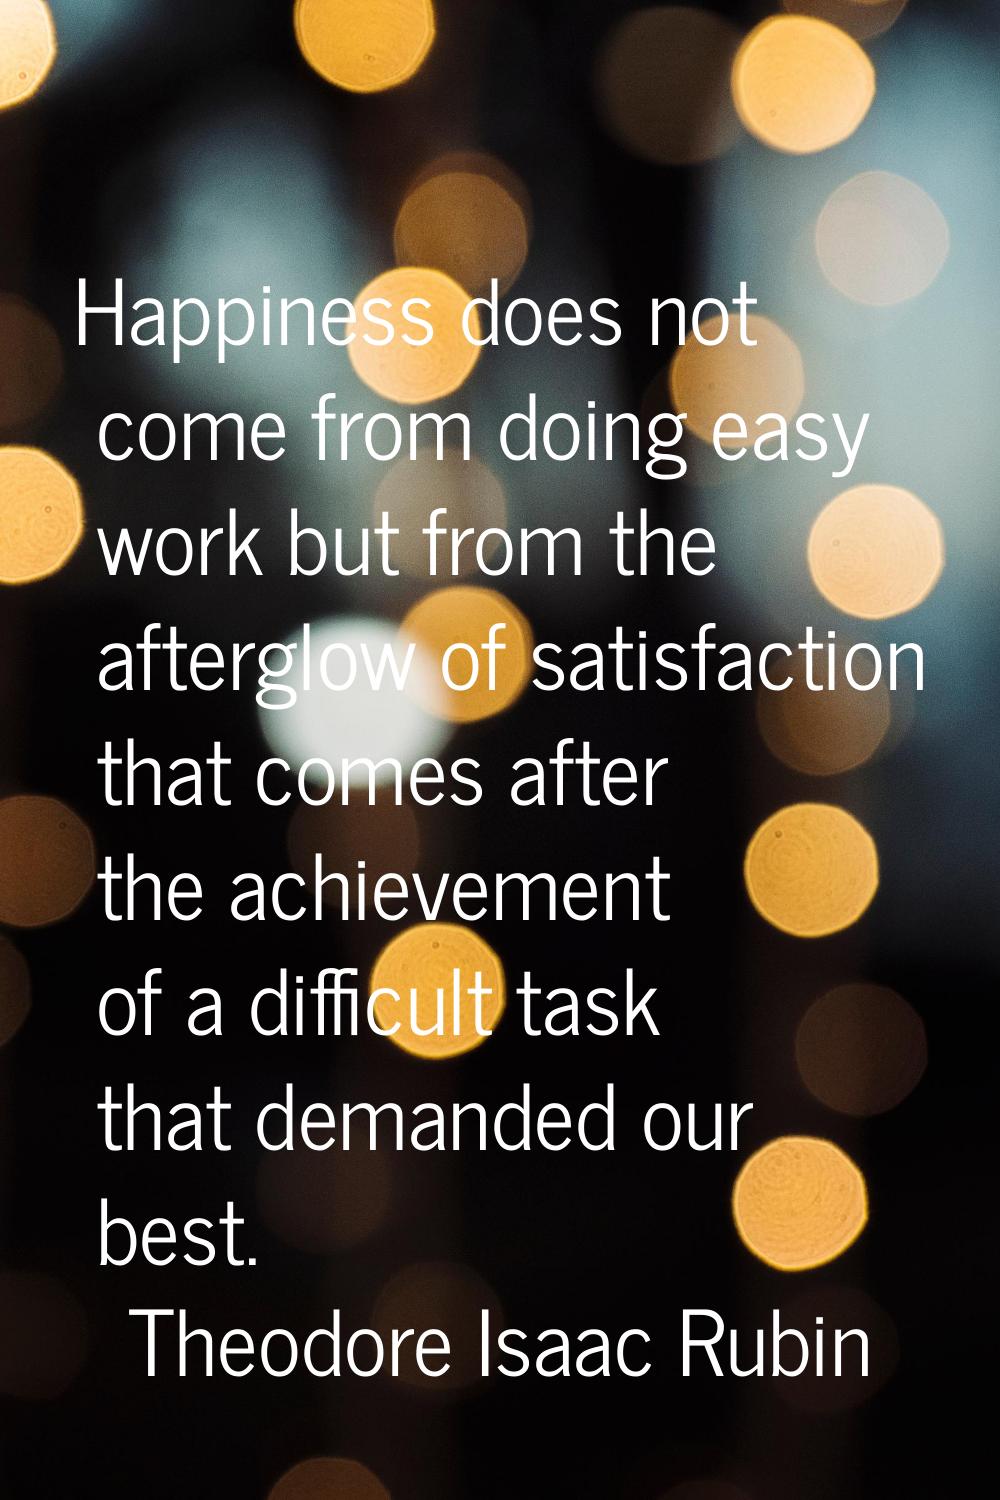 Happiness does not come from doing easy work but from the afterglow of satisfaction that comes afte